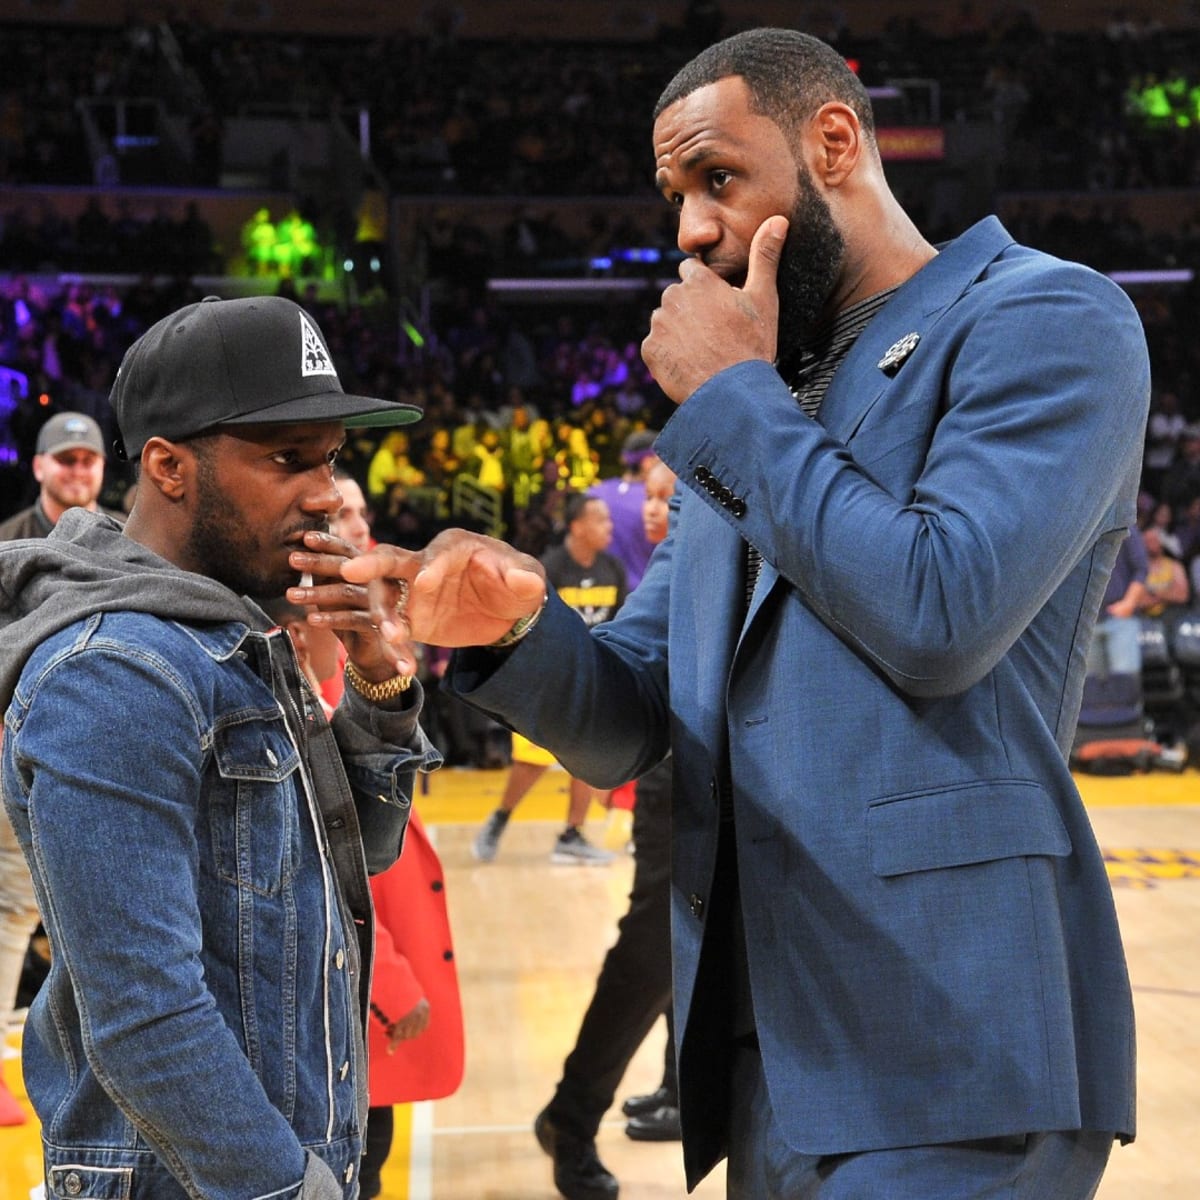 LeBron’s Wealthy Wisdom: How Paul Became the Secret Sauce to a $400 Million Empire